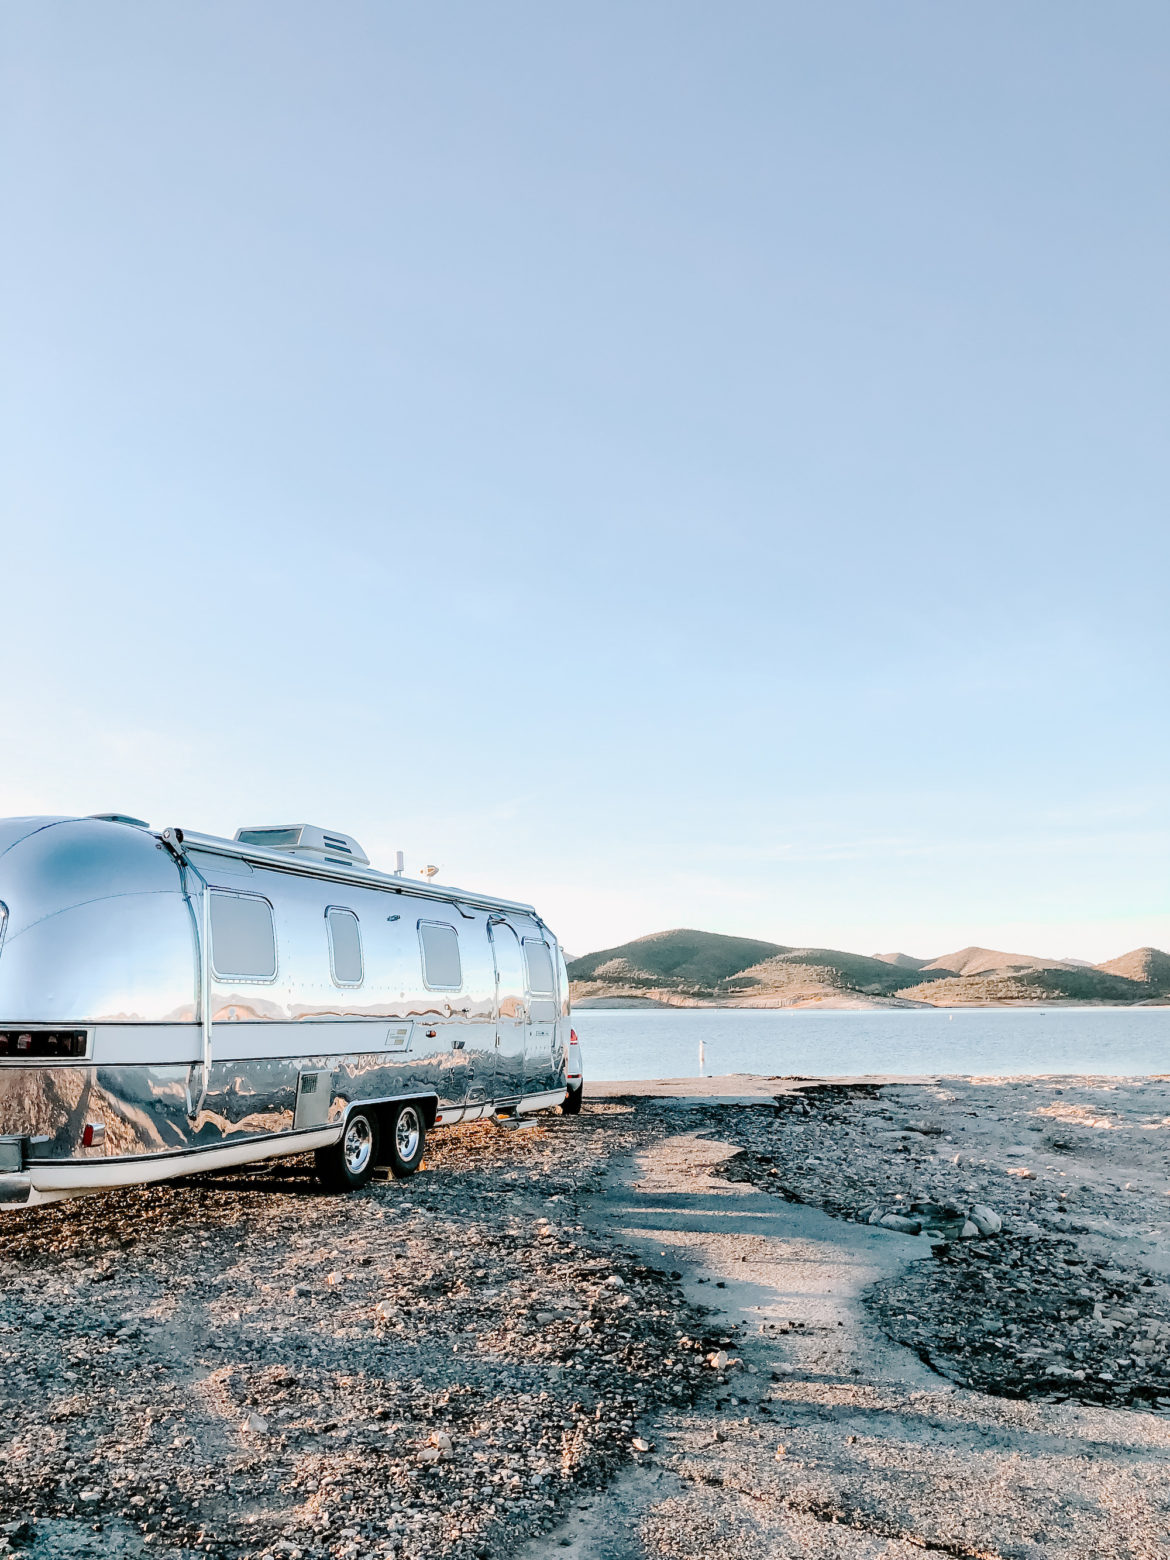 Want to live the RV life? Have you ever thought about buying an RV and road tripping? We bought a vintage airstream, renovated it and did an RV road trip! Want to know how to renovate an RV, find the best places to stay and live life on the road? We are answering your questions here...